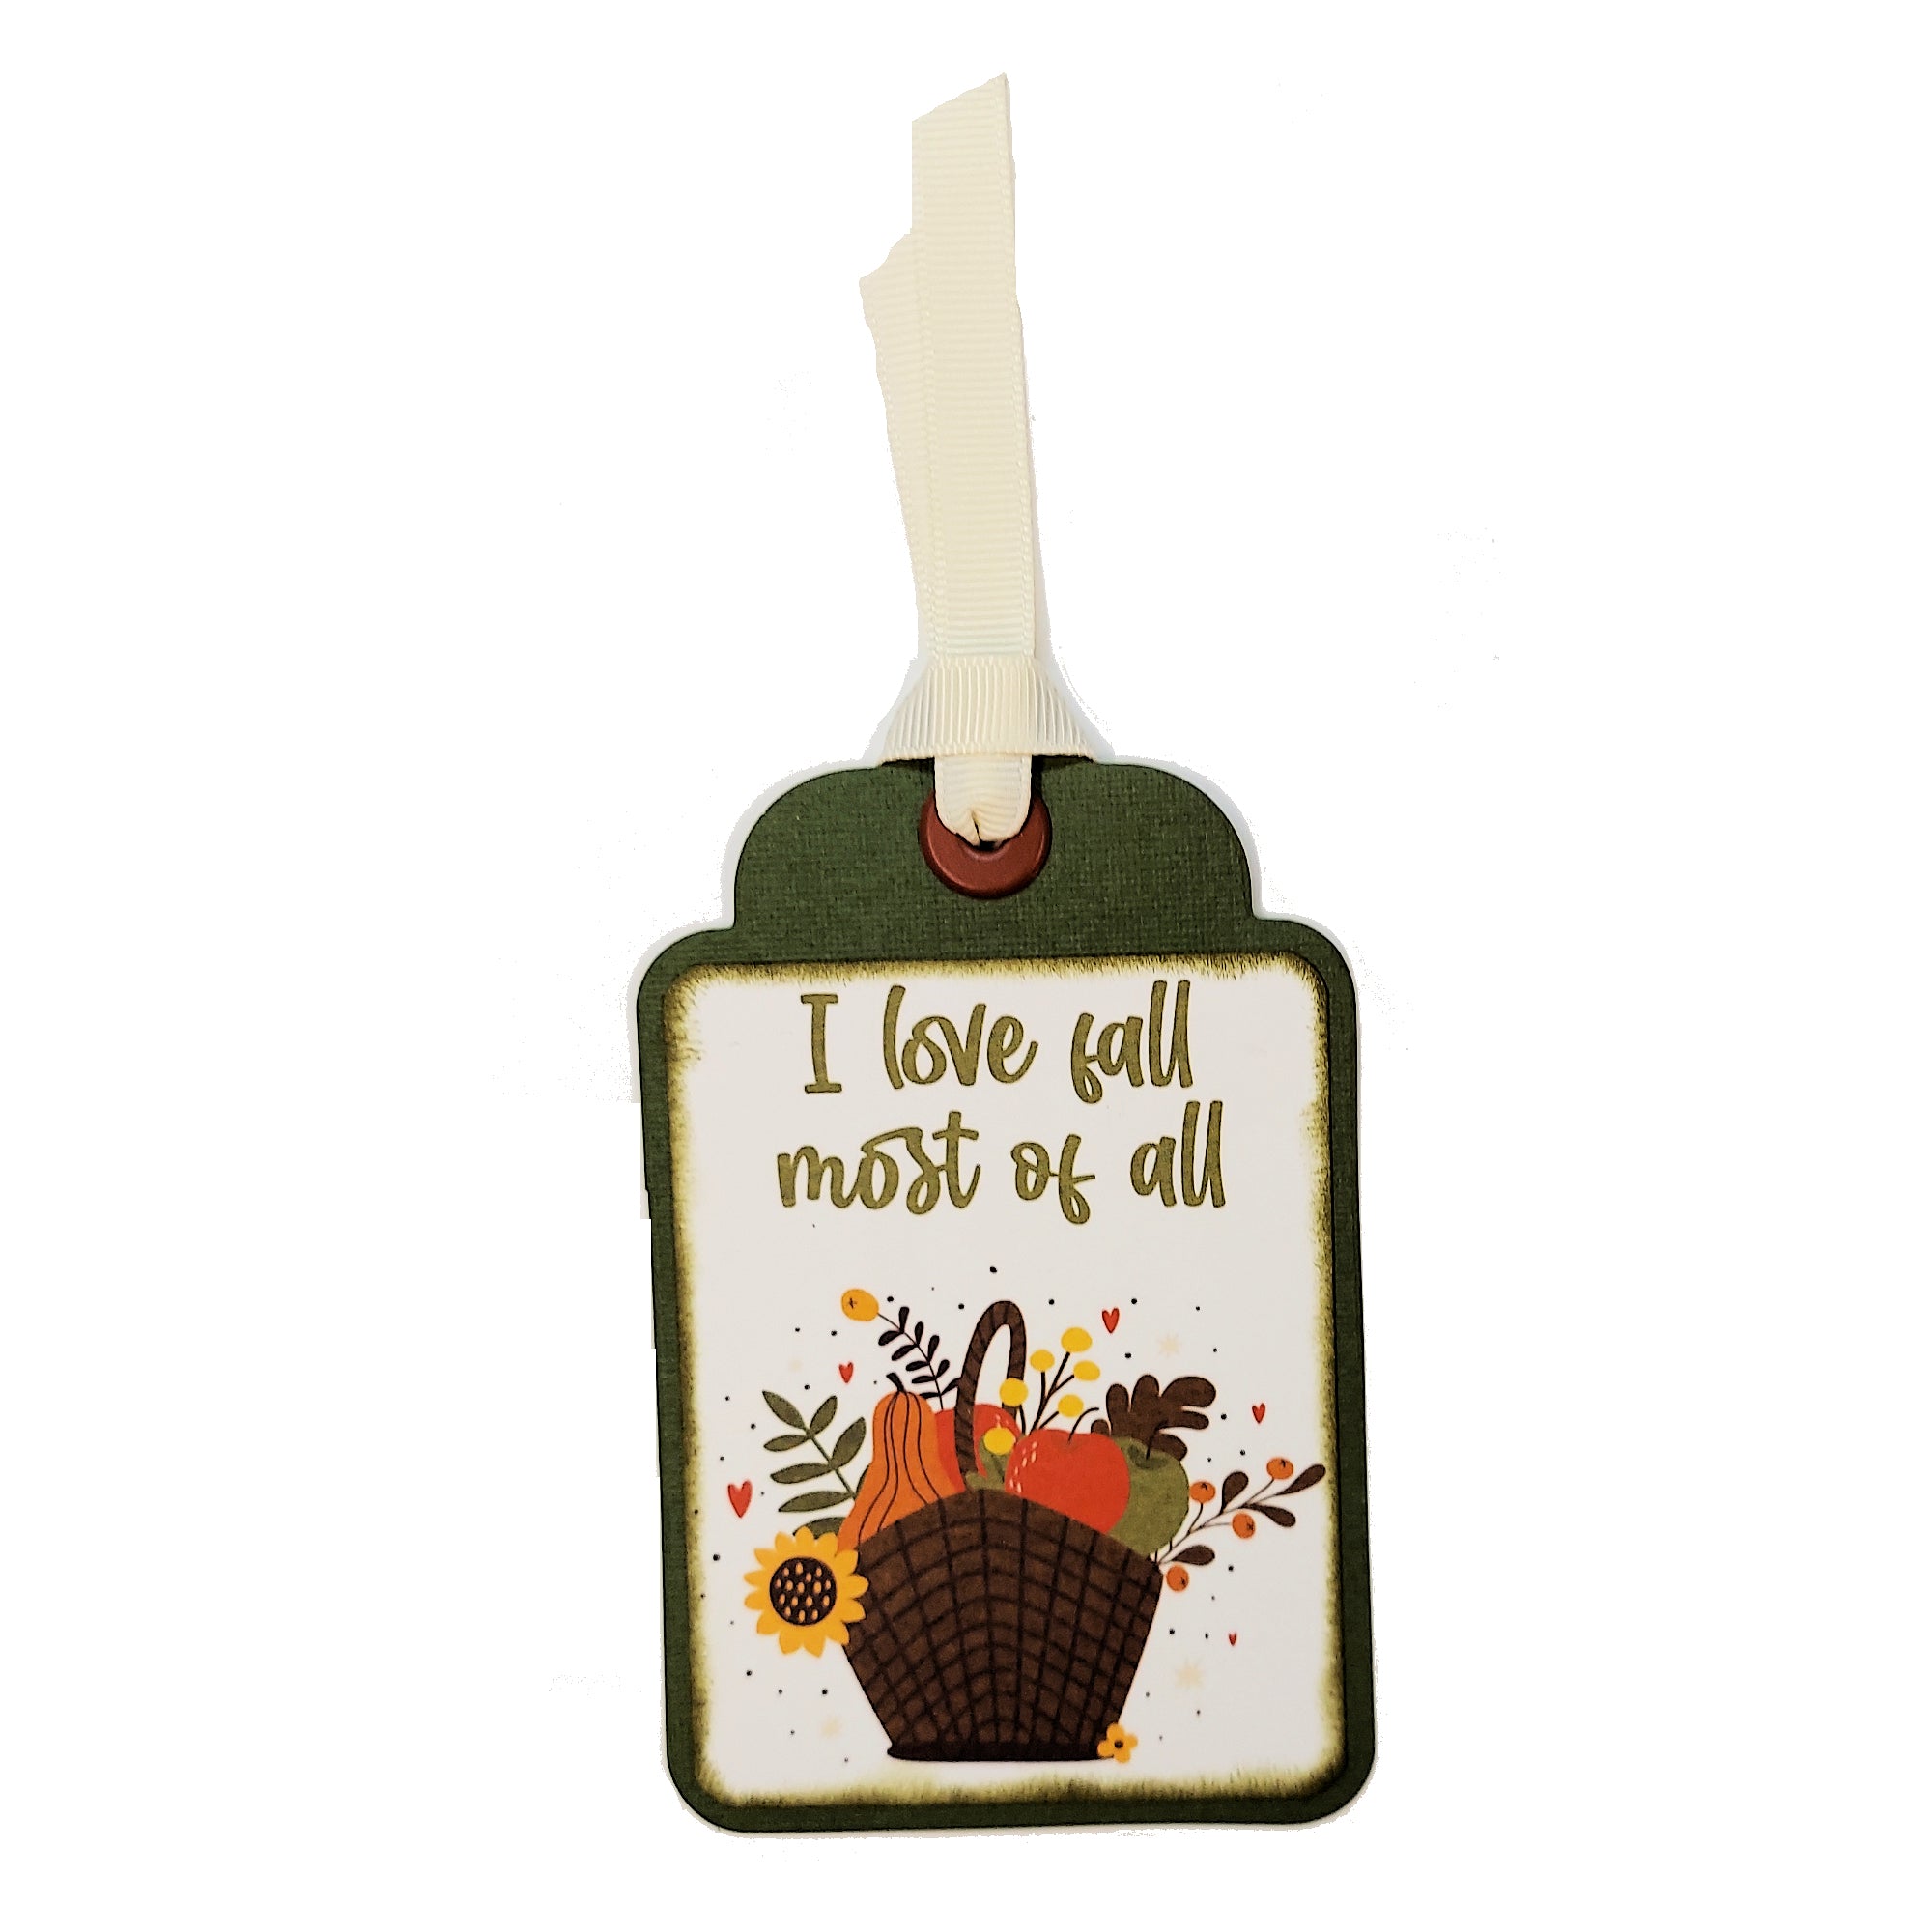 I Love Fall Most Of All Tag 3 x 5 Coordinating Scrapbook Tag Embellishment by SSC Designs